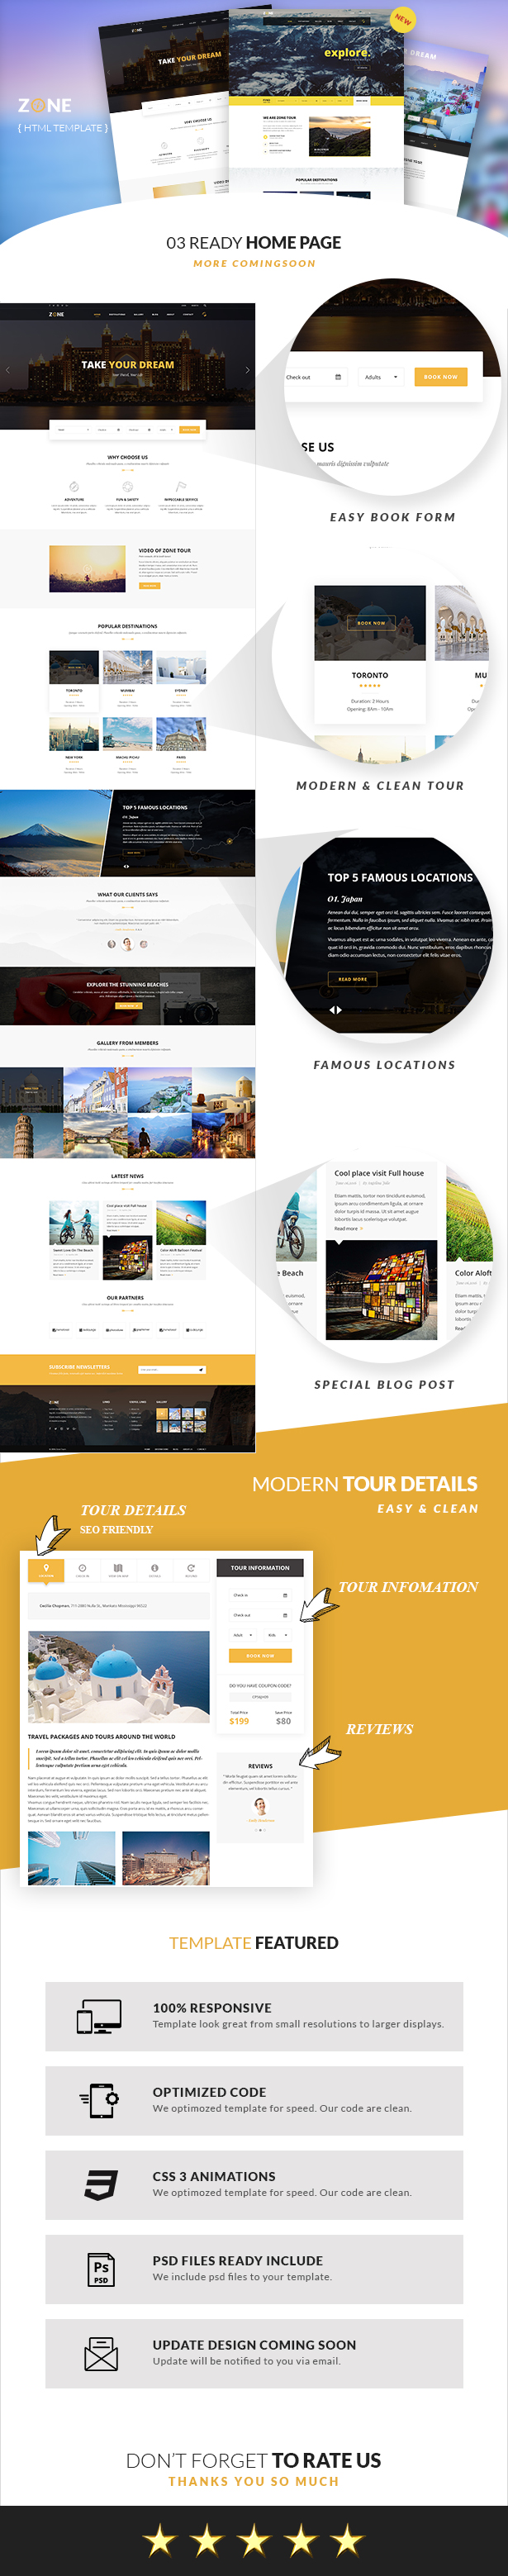 Zone - Tours and Travel HTML Template - 5